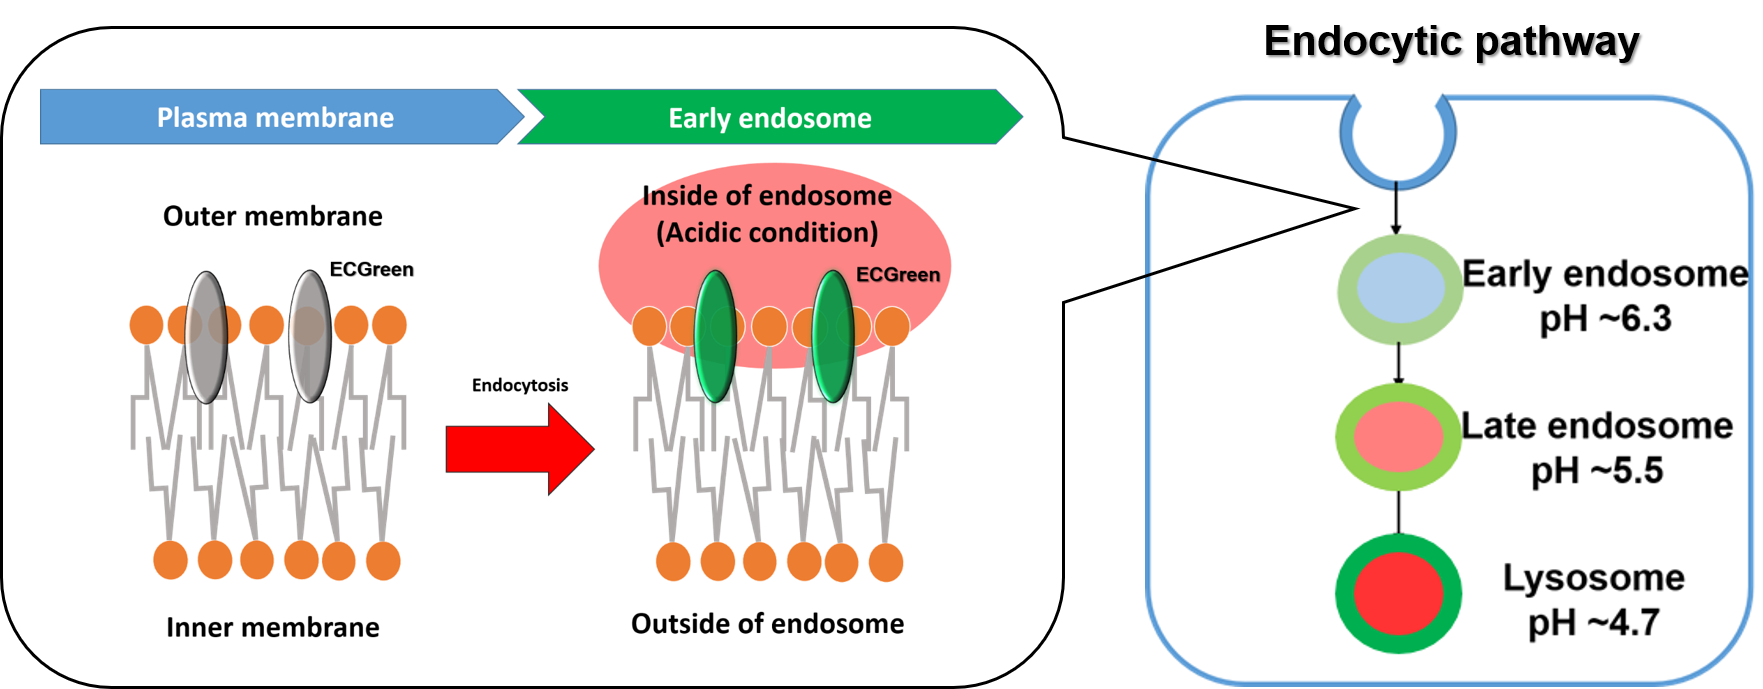 Using the ECGreen allows visualization endocytosis from the stage of early endosomes